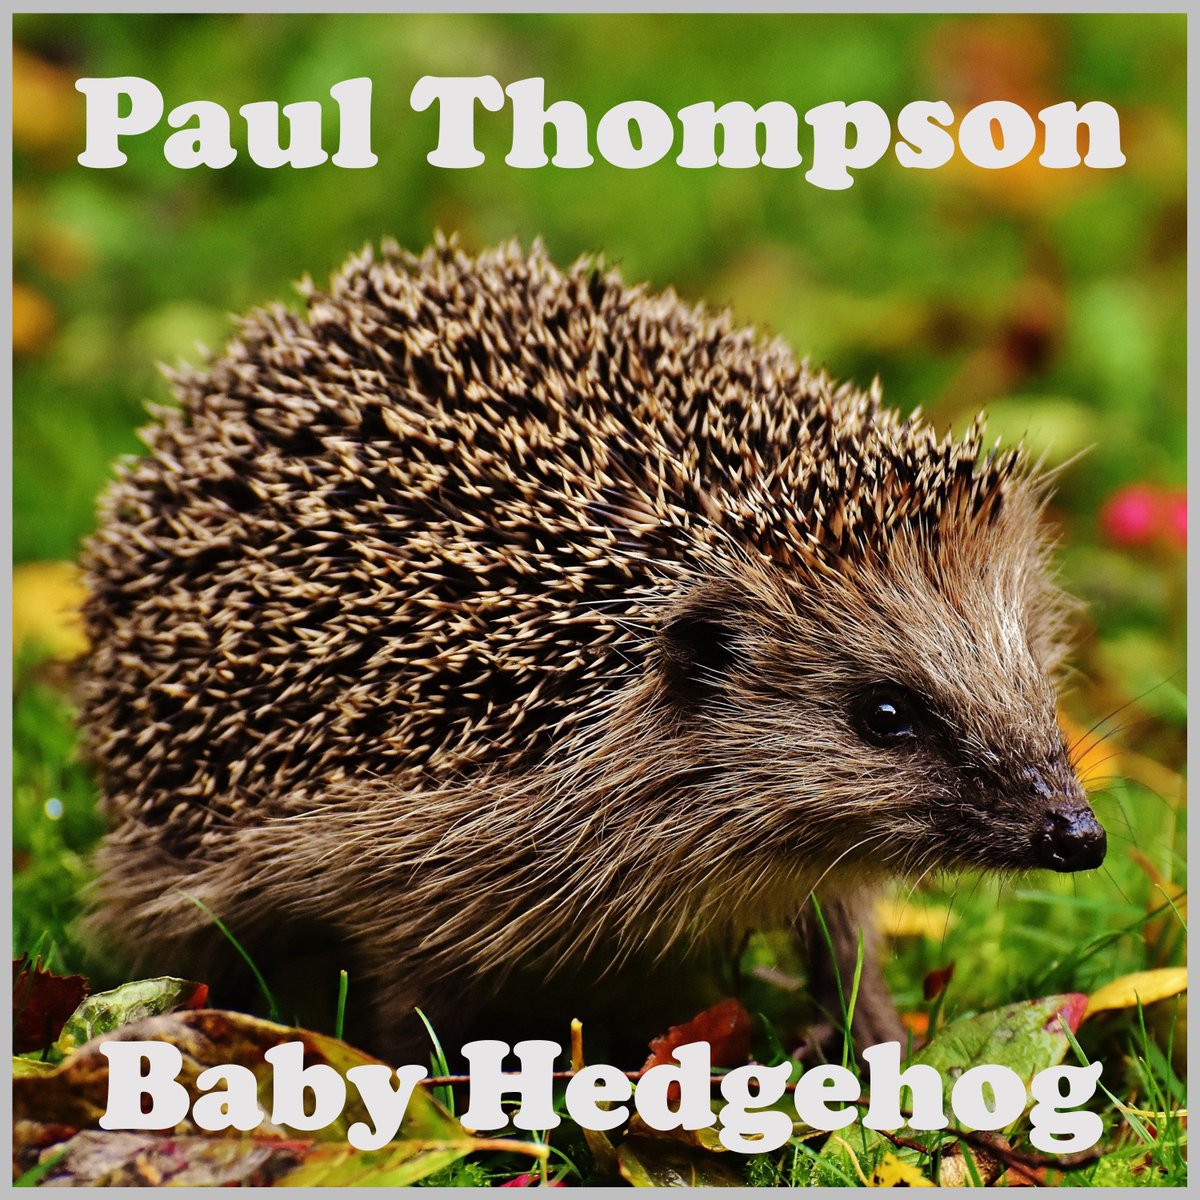 Huge thanks to Amplify the Noise for their review of #babyhedgehog. Check it out!  #HedgehogAwarenessWeek
buff.ly/3R0iPDN